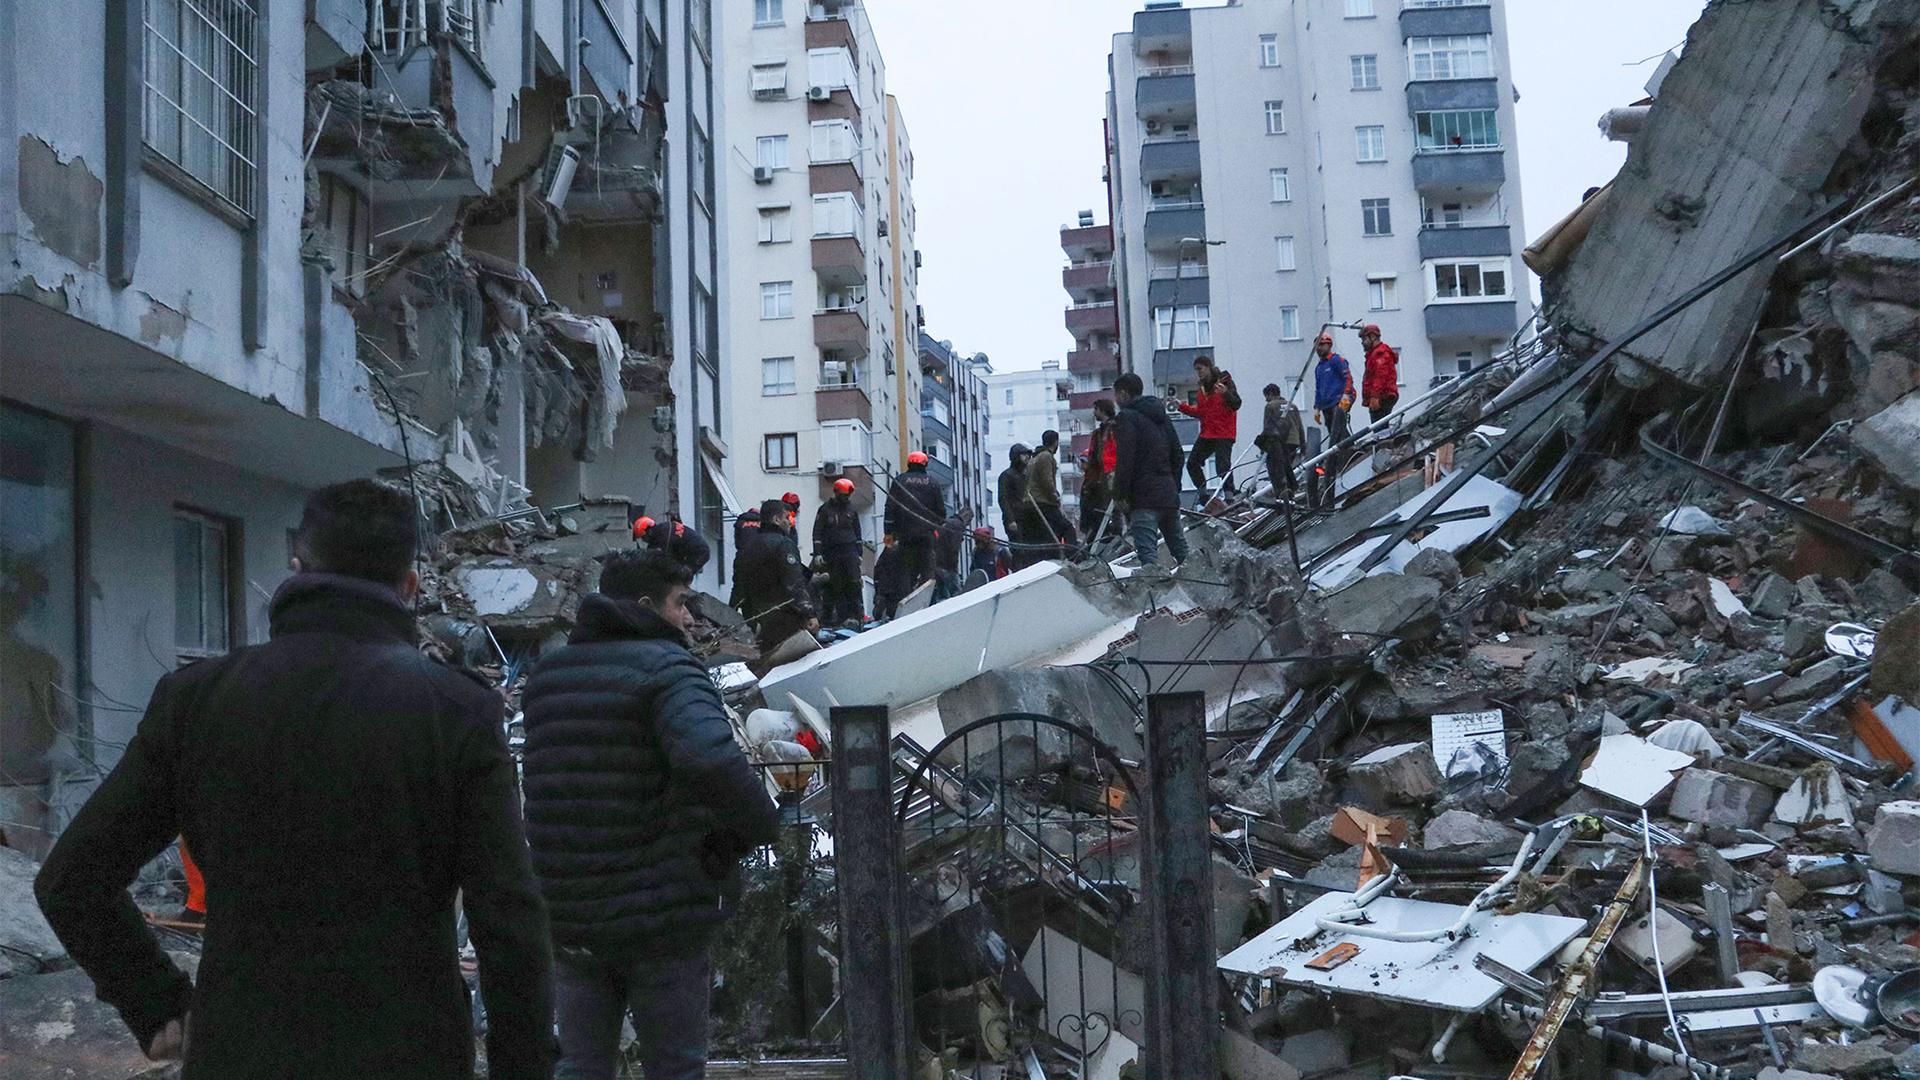 People and rescue teams try to reach trapped residents inside collapsed buildings in Adana, Turkey, Feb. 6, 2023.